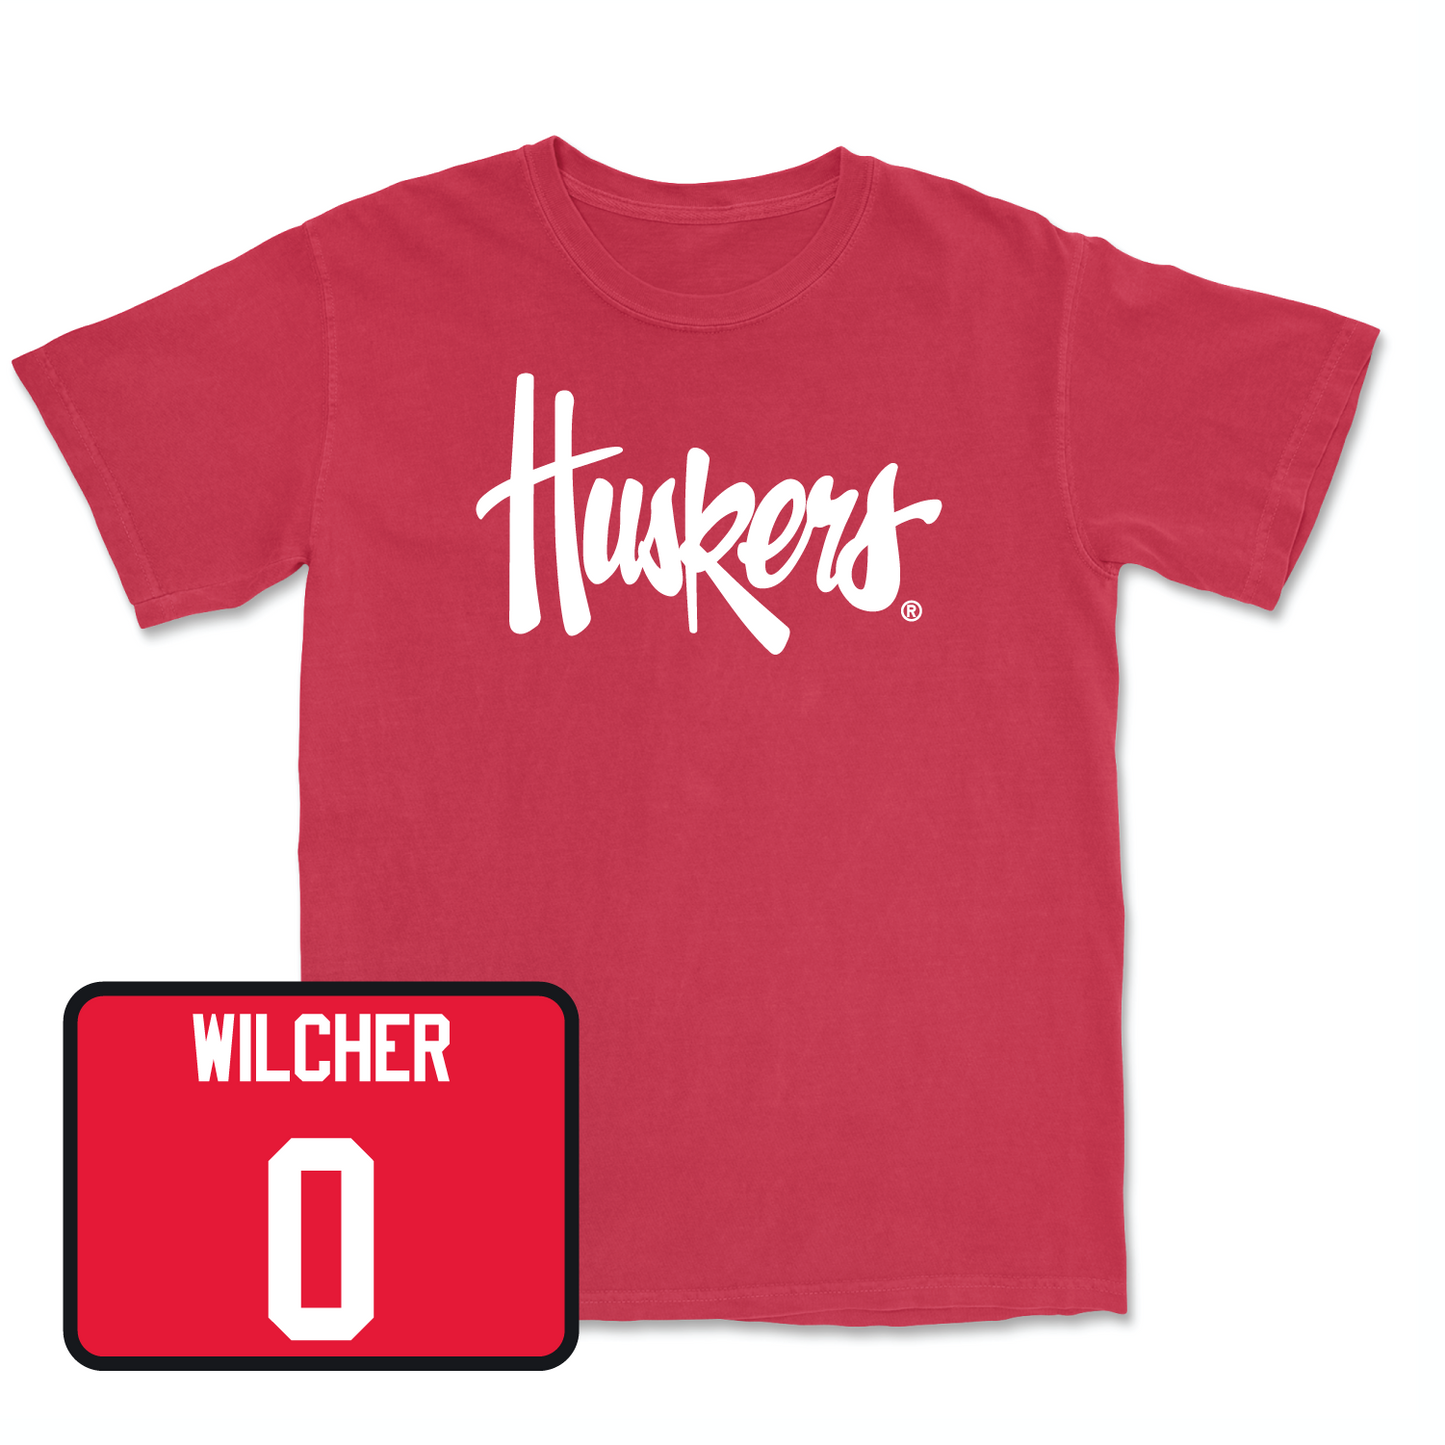 Red Men's Basketball Huskers Tee Large / C.J. Wilcher | #0